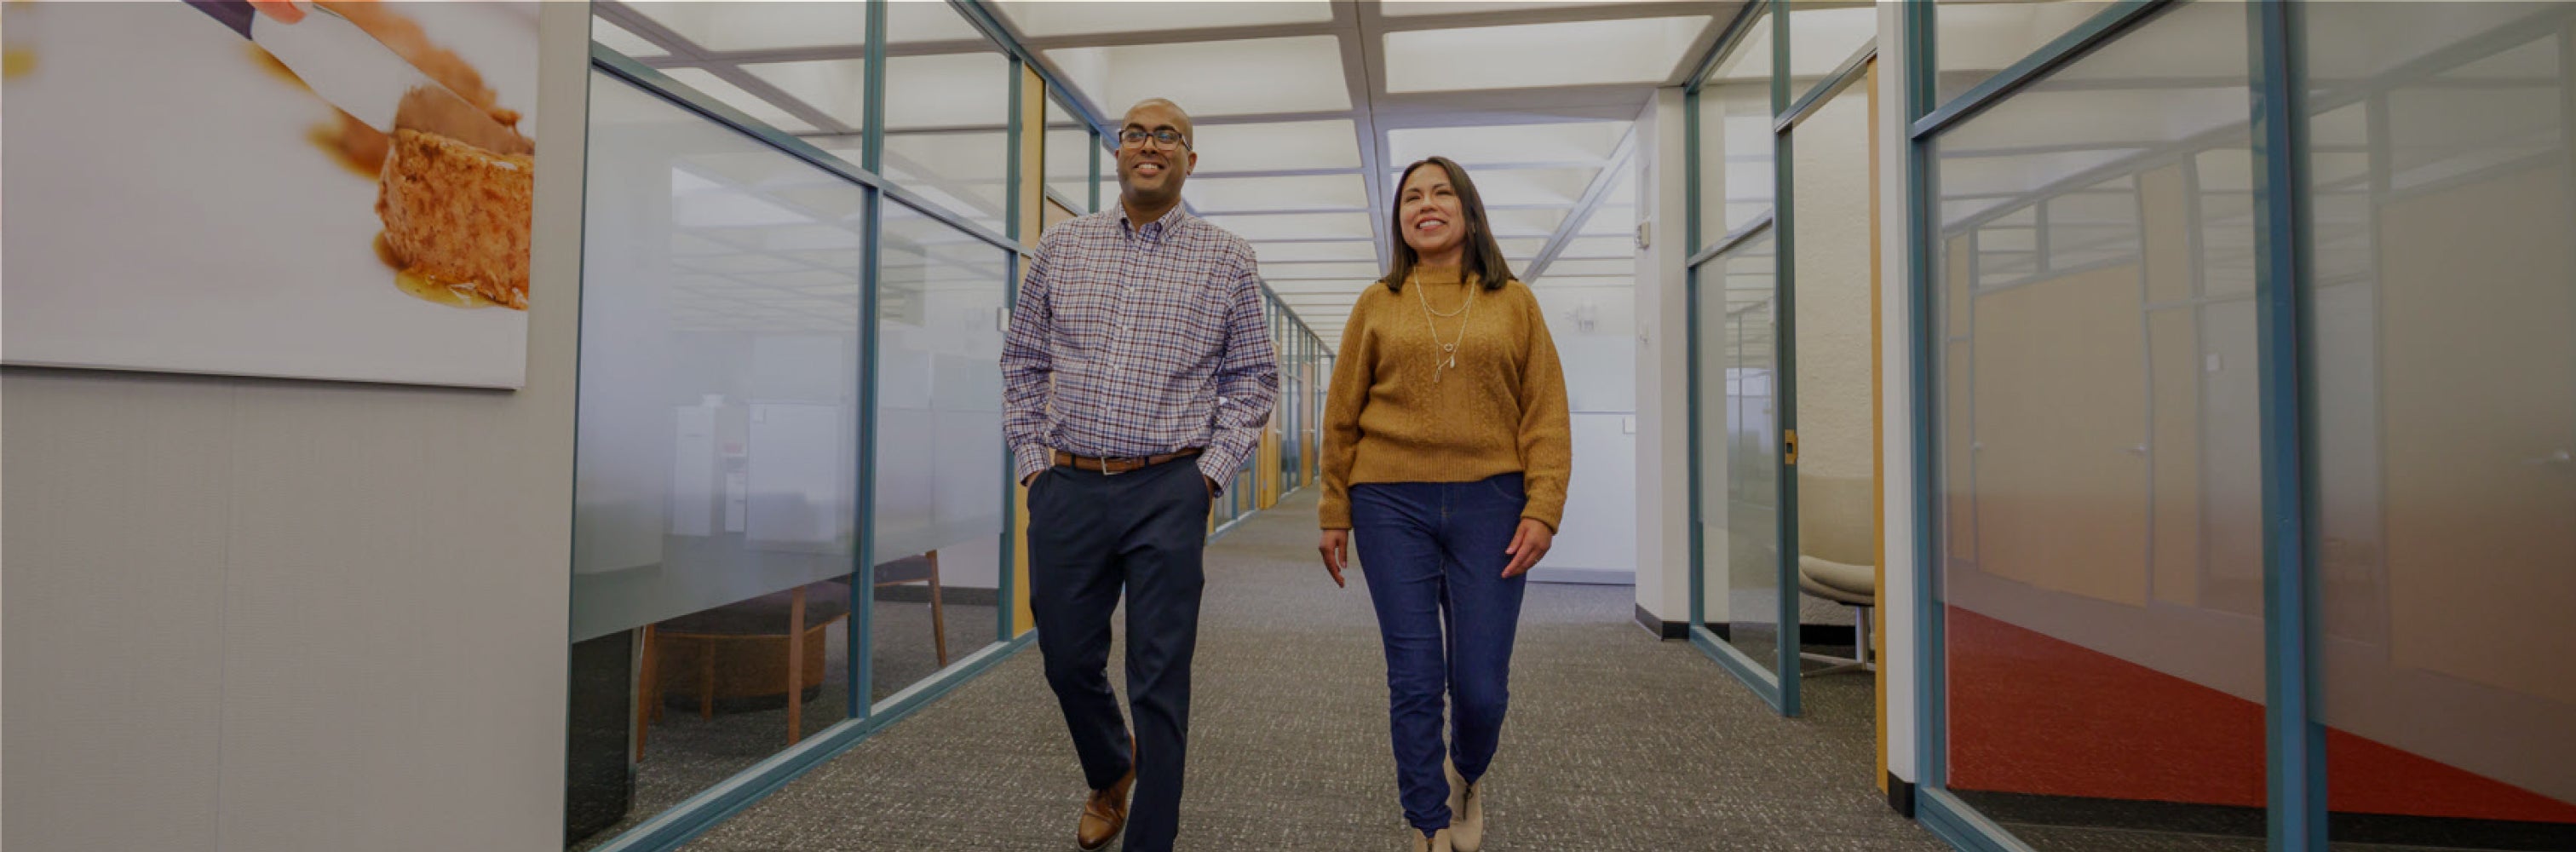 Two contractor employees walking down the hallway